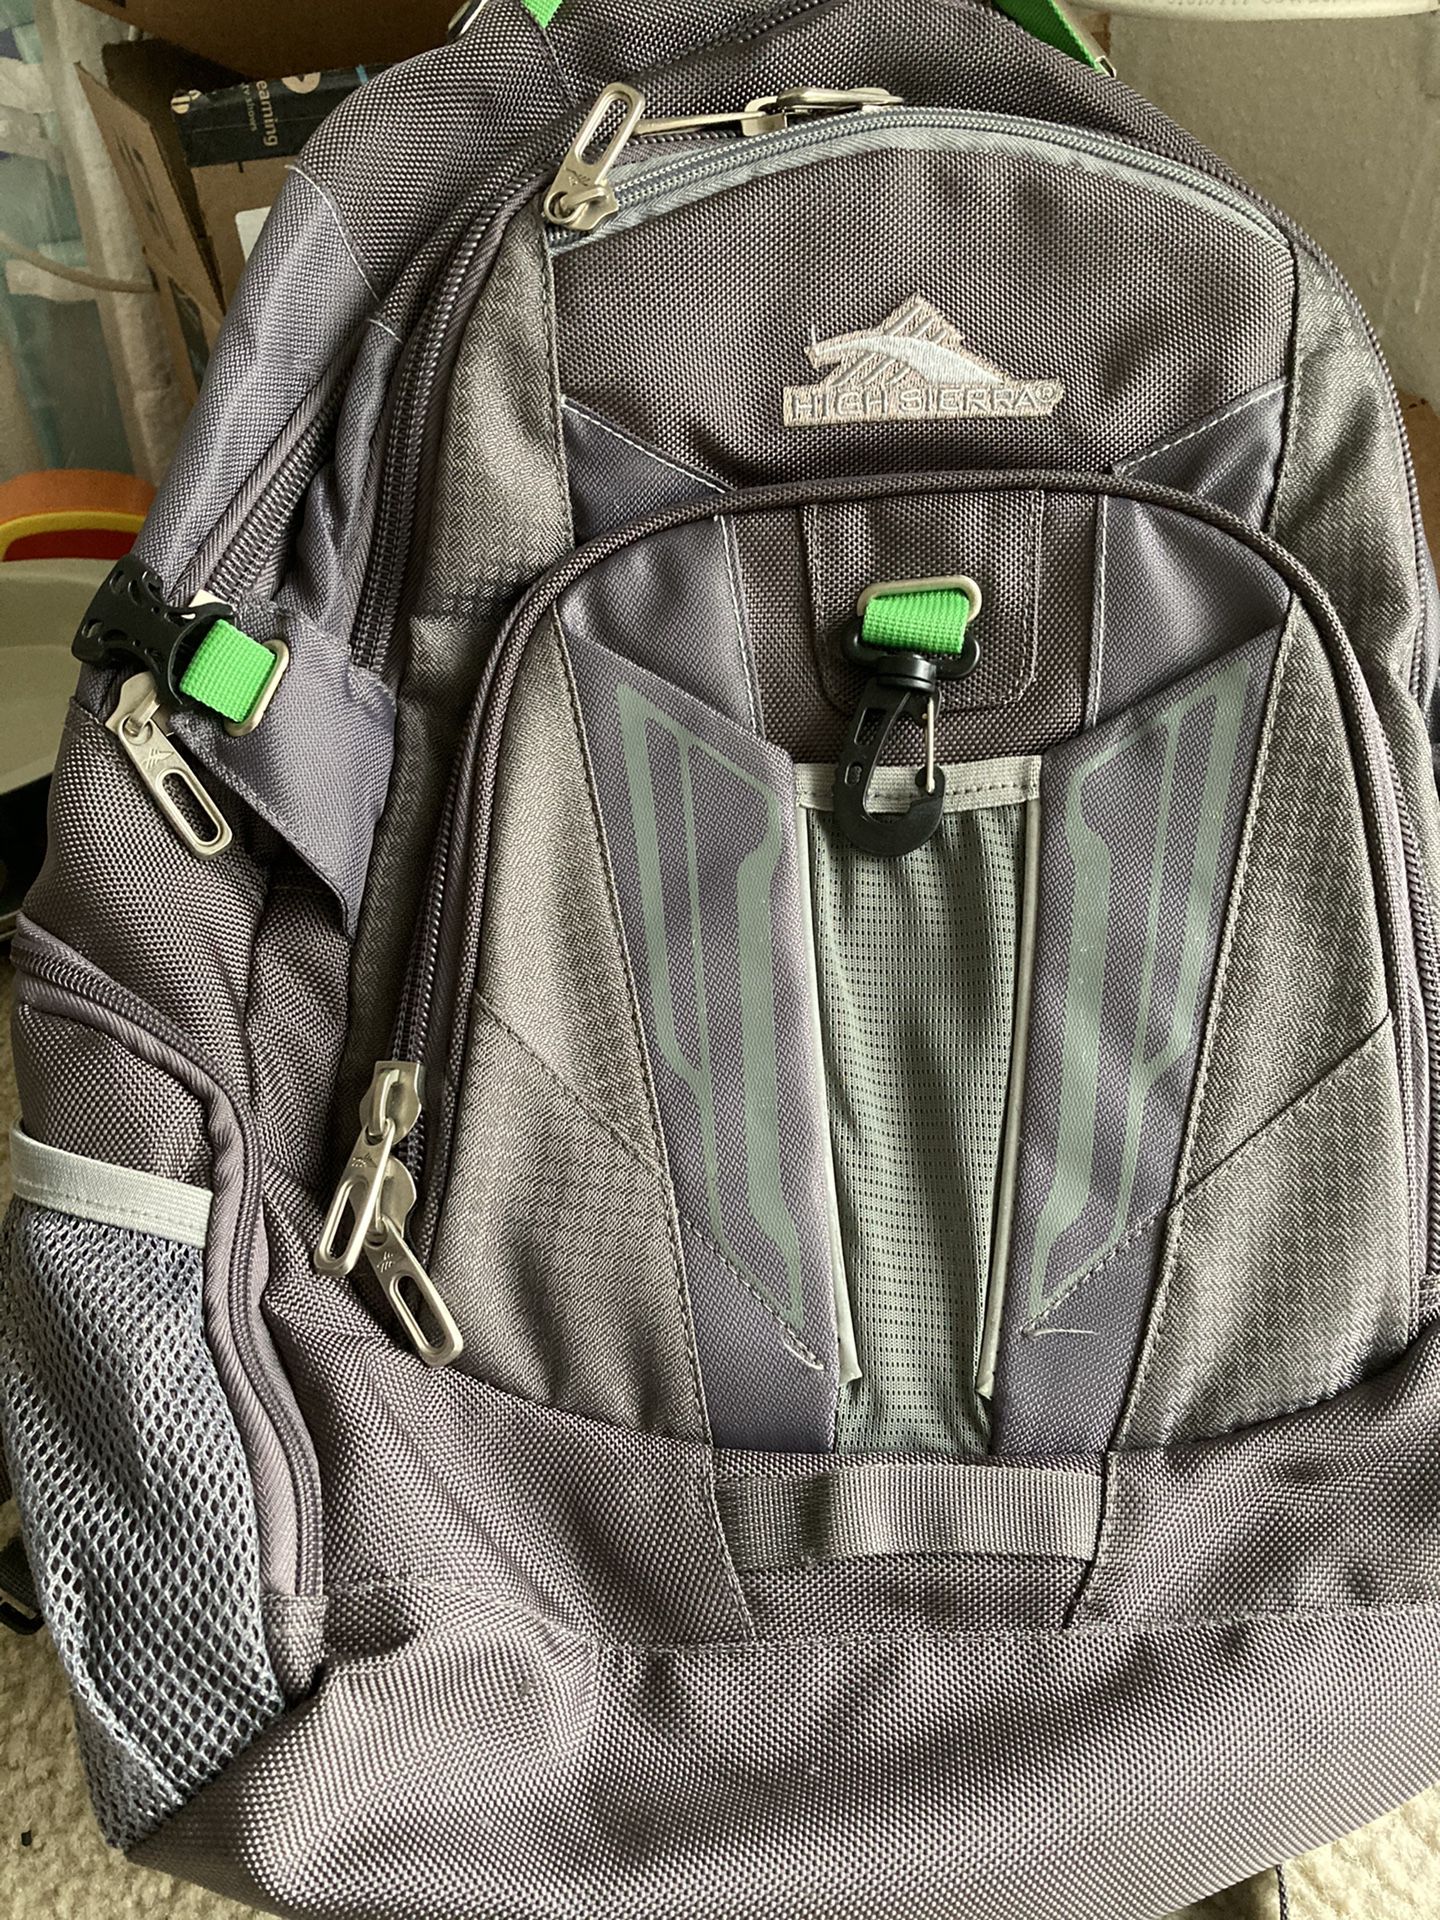 High Sierra XBT TSA Laptop Backpack - Ideal for High School and College Students - Fits Most 17-inch Laptop Models & Free Tote Bag